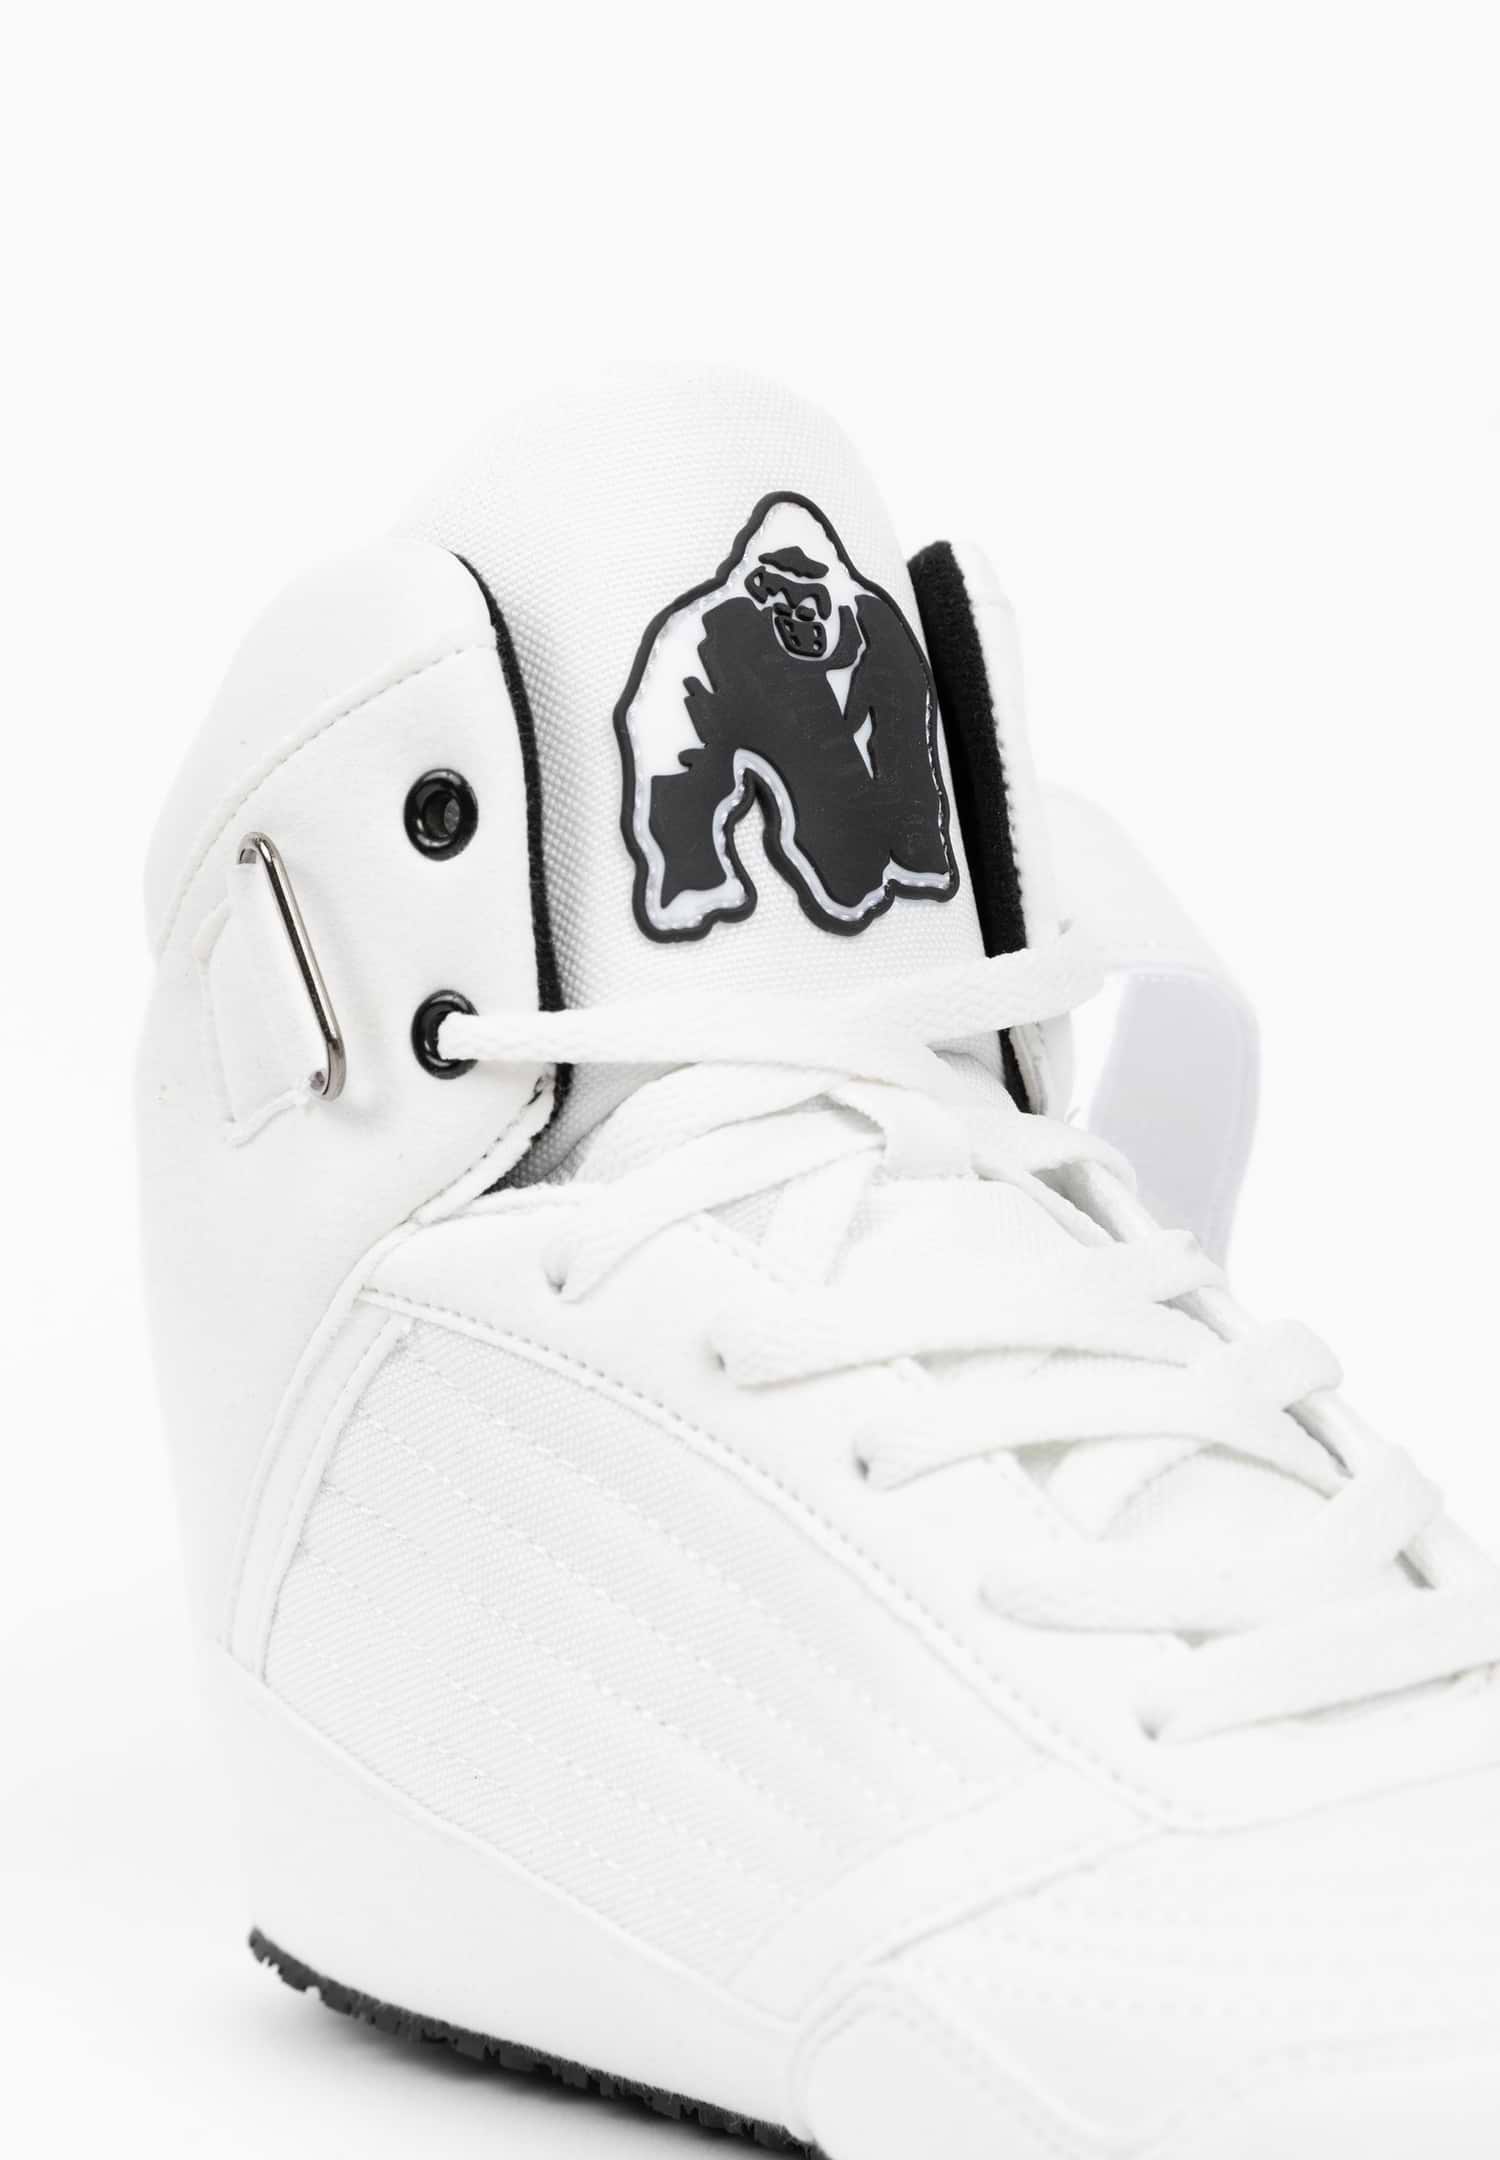 Gorilla Wear High Tops - Black Weightlifting Shoes